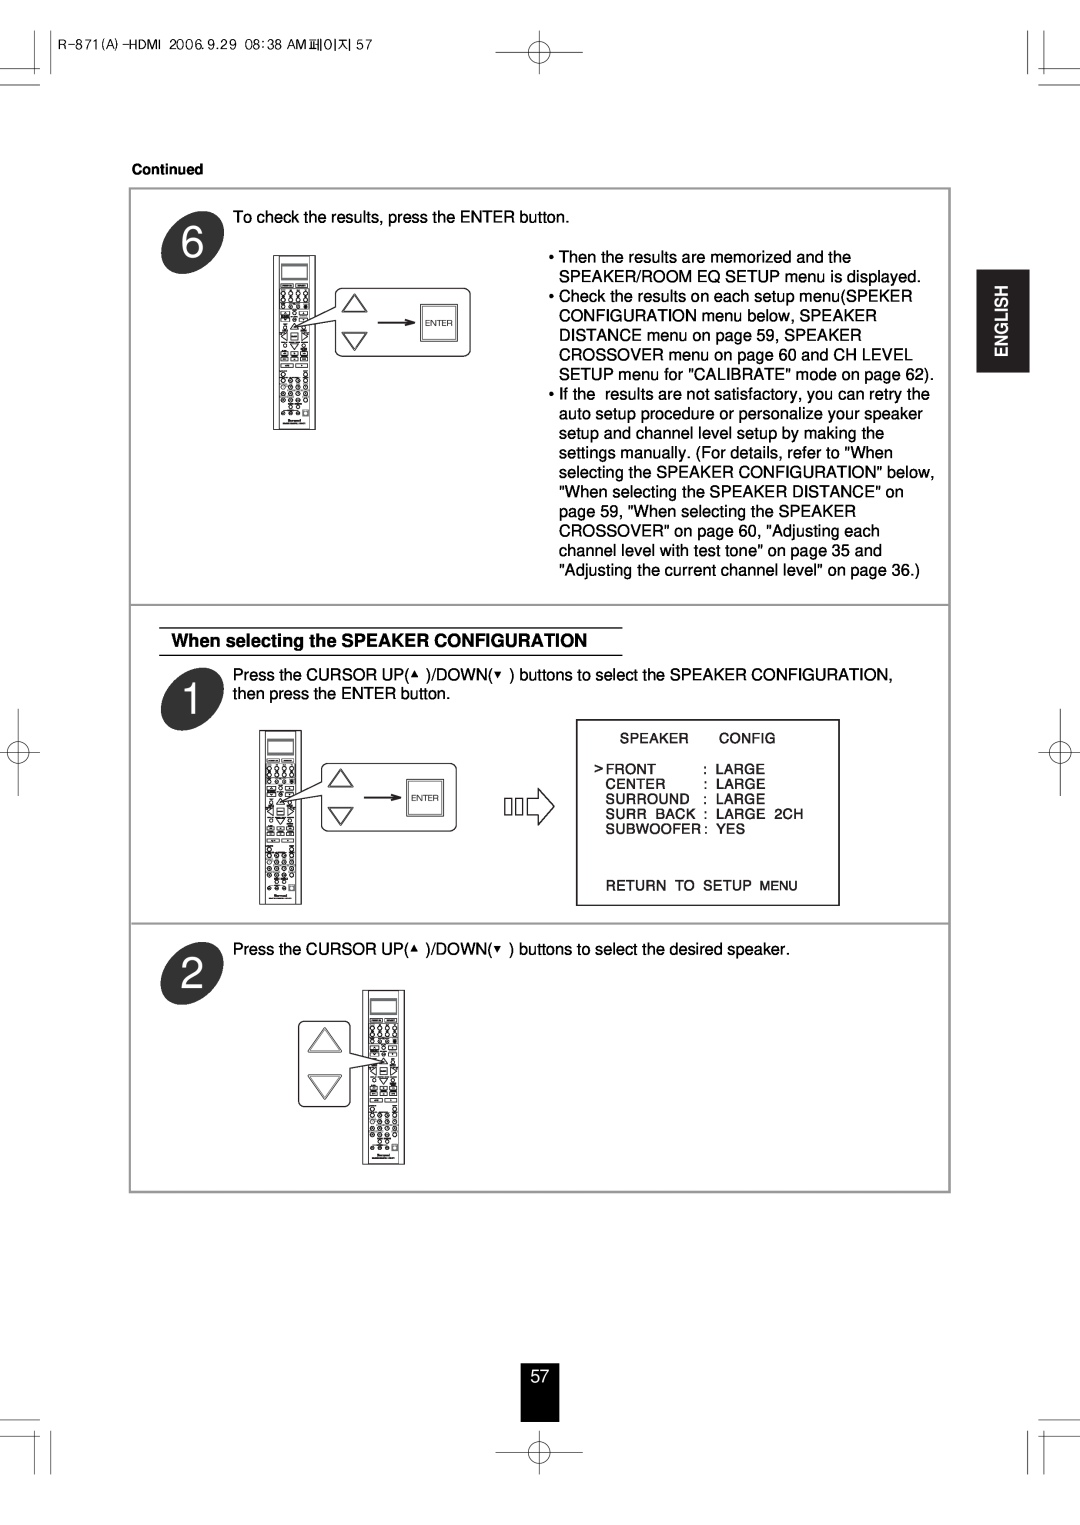 Sherwood R-871 manual When selecting the SPEAKER CONFIGURATION, English 